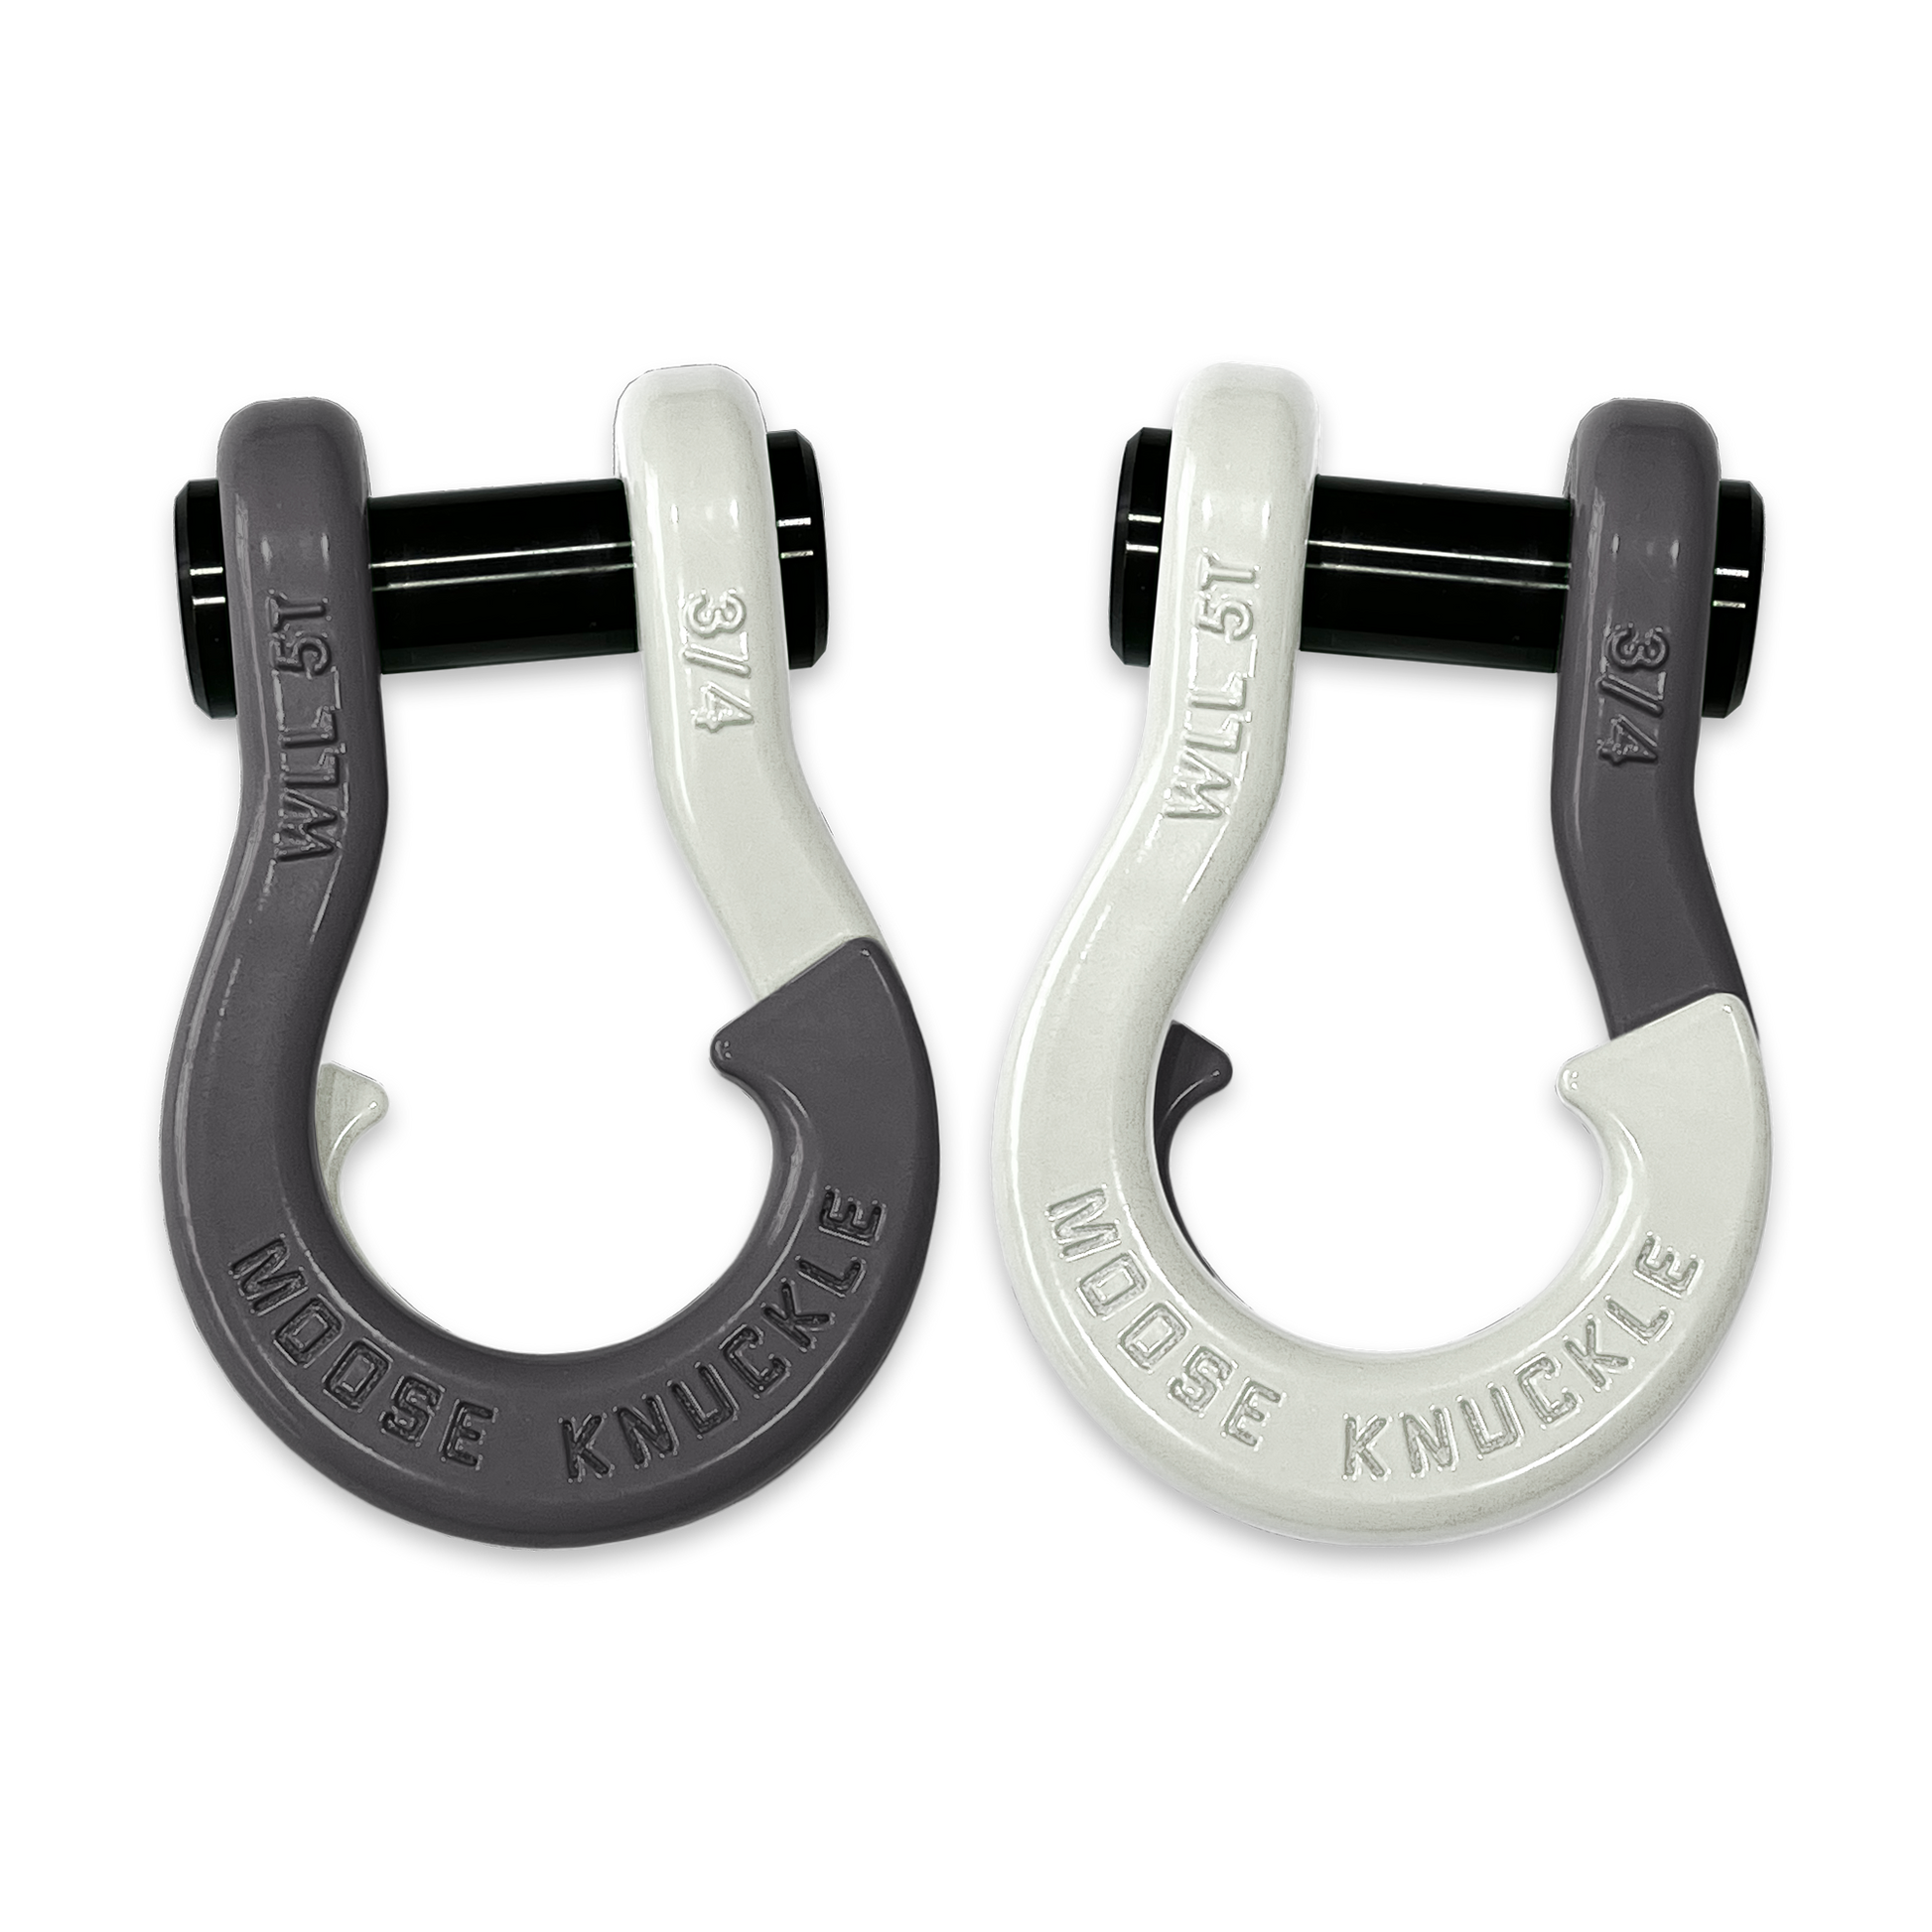 Moose Knuckle's Jowl Recovery Split Shackle 3/4 in Gun Gray and Pure White Combo